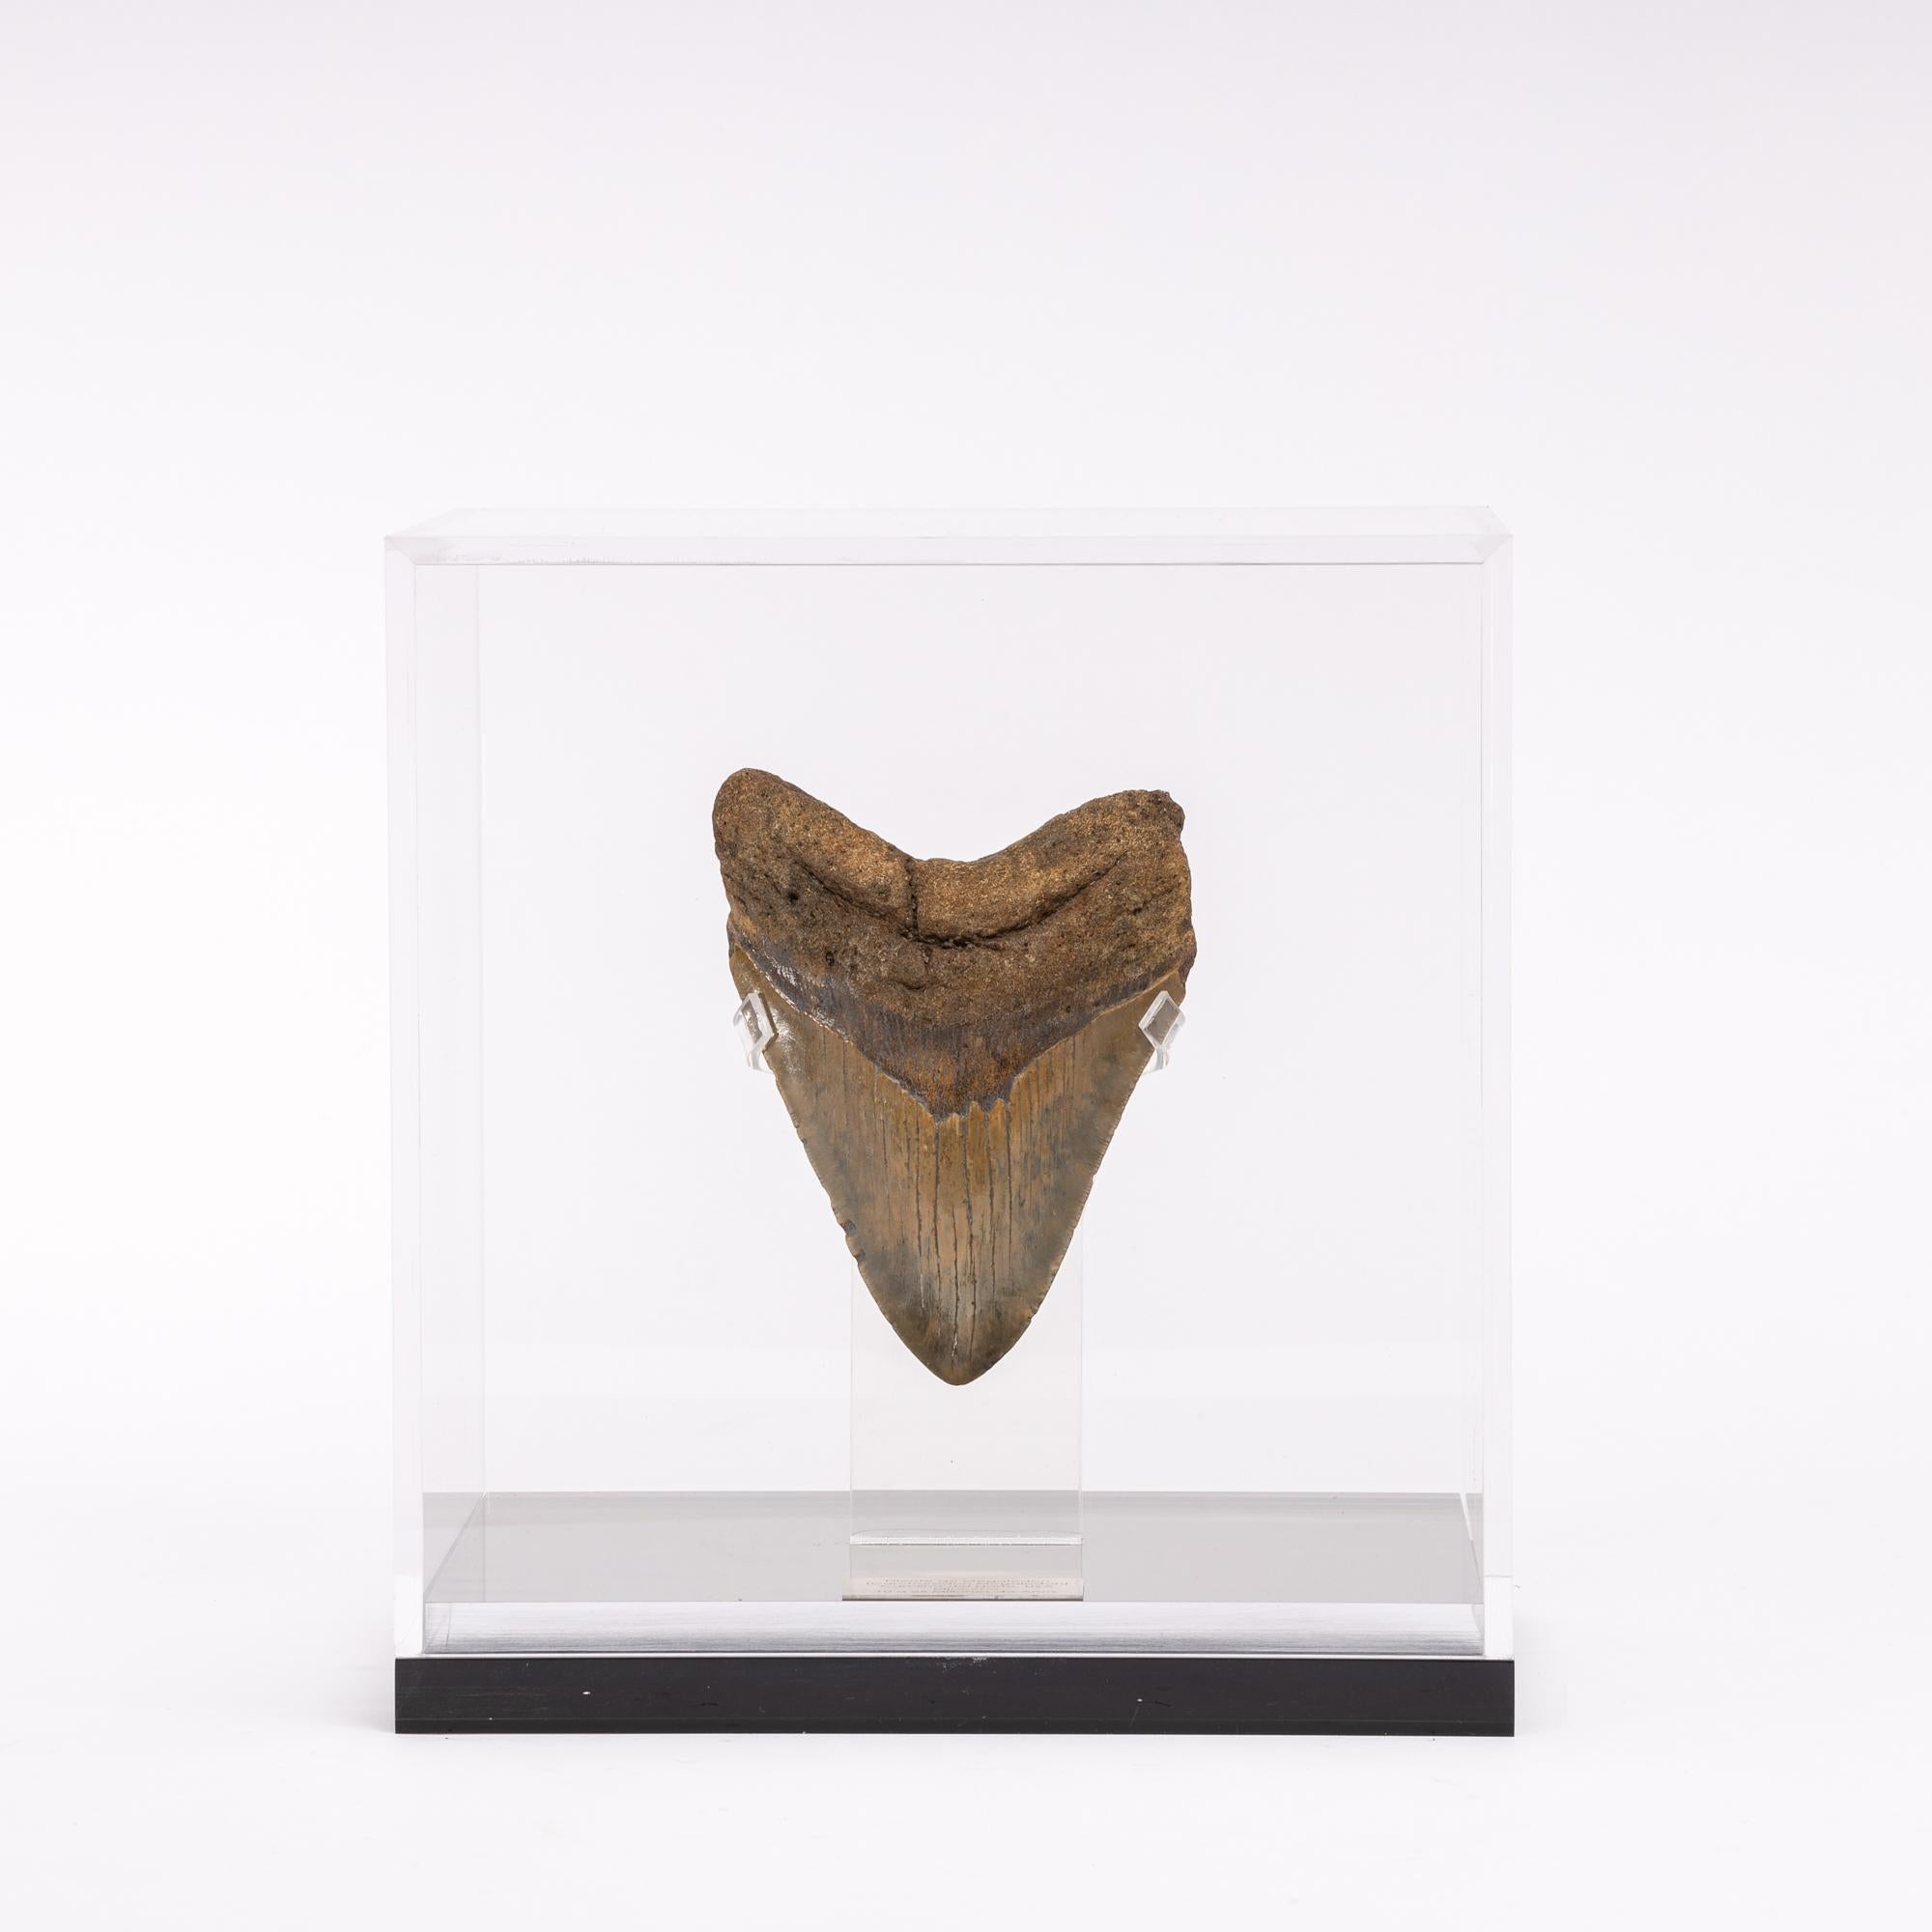 Megalodon is an extinct species of sharks that lived 10-25 million years ago, during the Miocene period.
It´s considered the biggest predator that has ever lived, reaching lengths up to 60 feet and estimated weight of 60 tons. Their jaw could exert